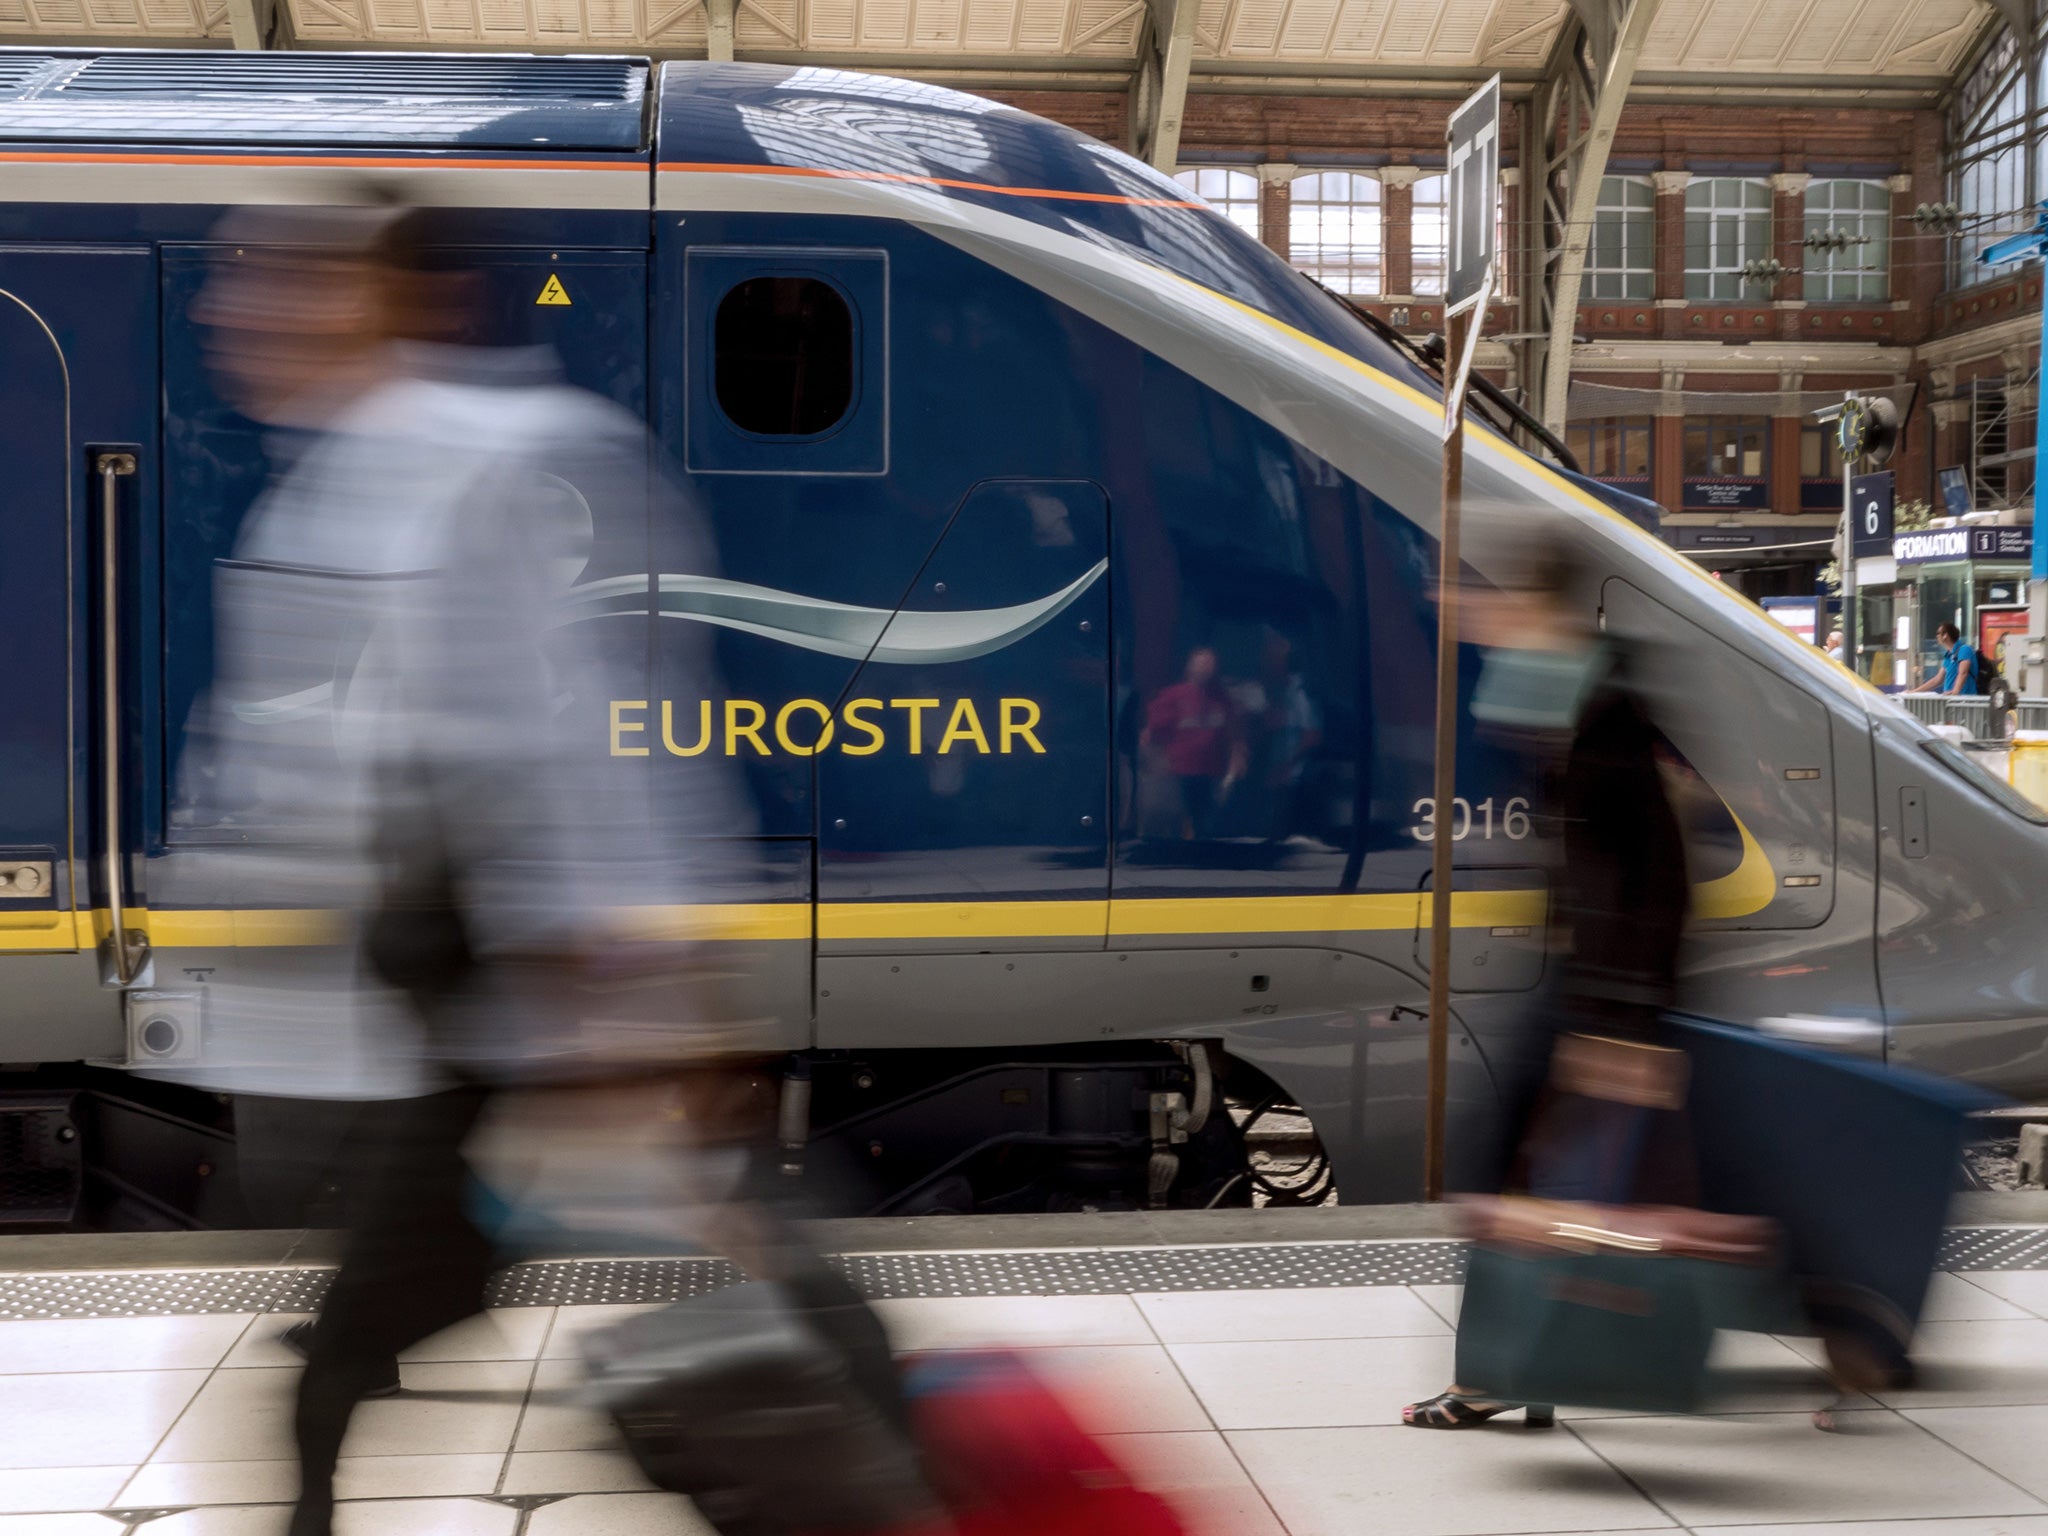 Eurostar asks Standard ticket holders to check in a minimum of half an hour in advance